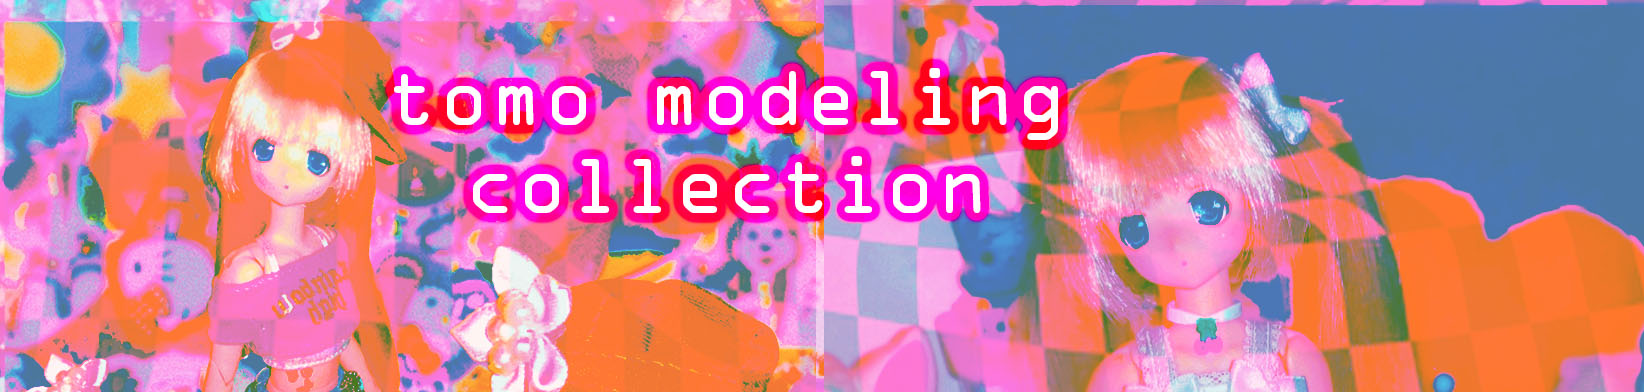 Tomo Modeling Collection PDF + ZINE GUIDE